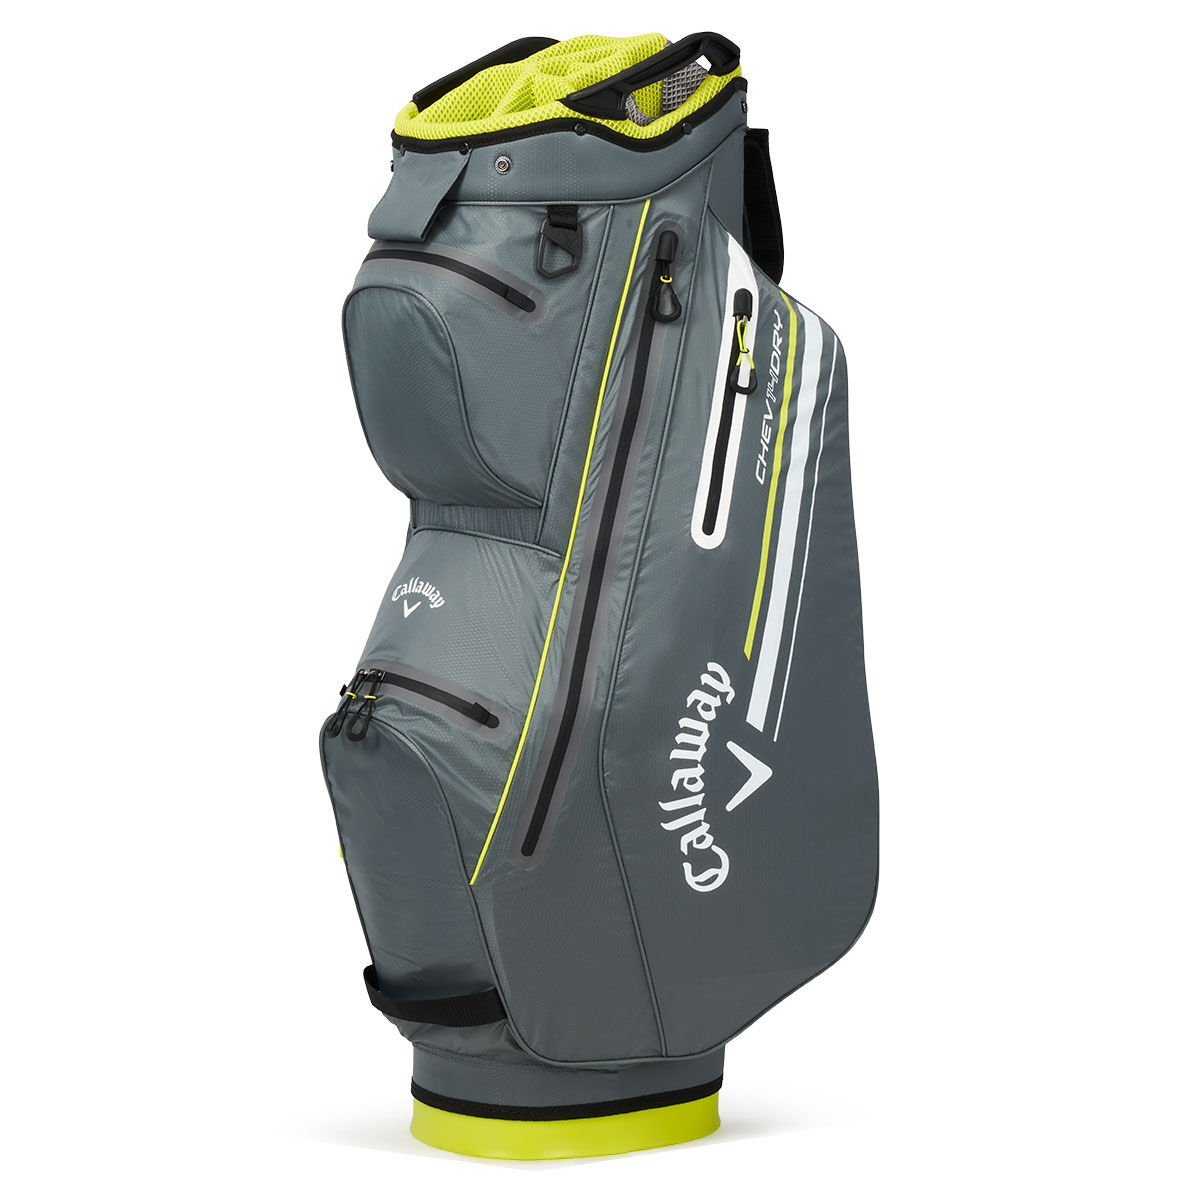 Callaway Chev Dry 14 Golf Cart Bag, Charcoal/flo yellow, One Size | American Golf